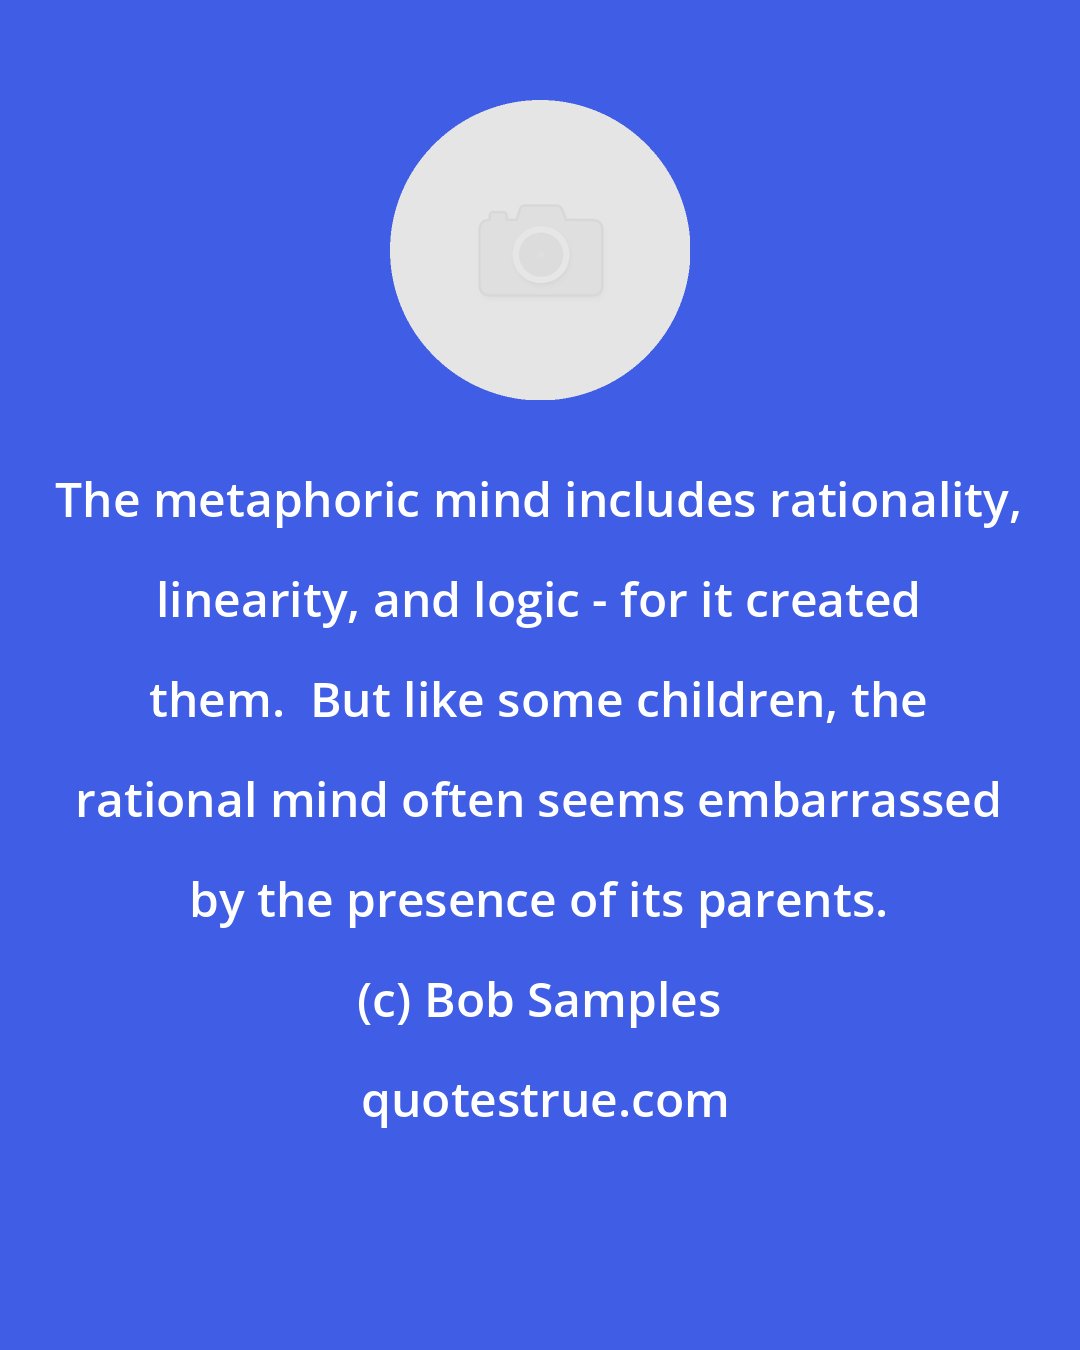 Bob Samples: The metaphoric mind includes rationality, linearity, and logic - for it created them.  But like some children, the rational mind often seems embarrassed by the presence of its parents.